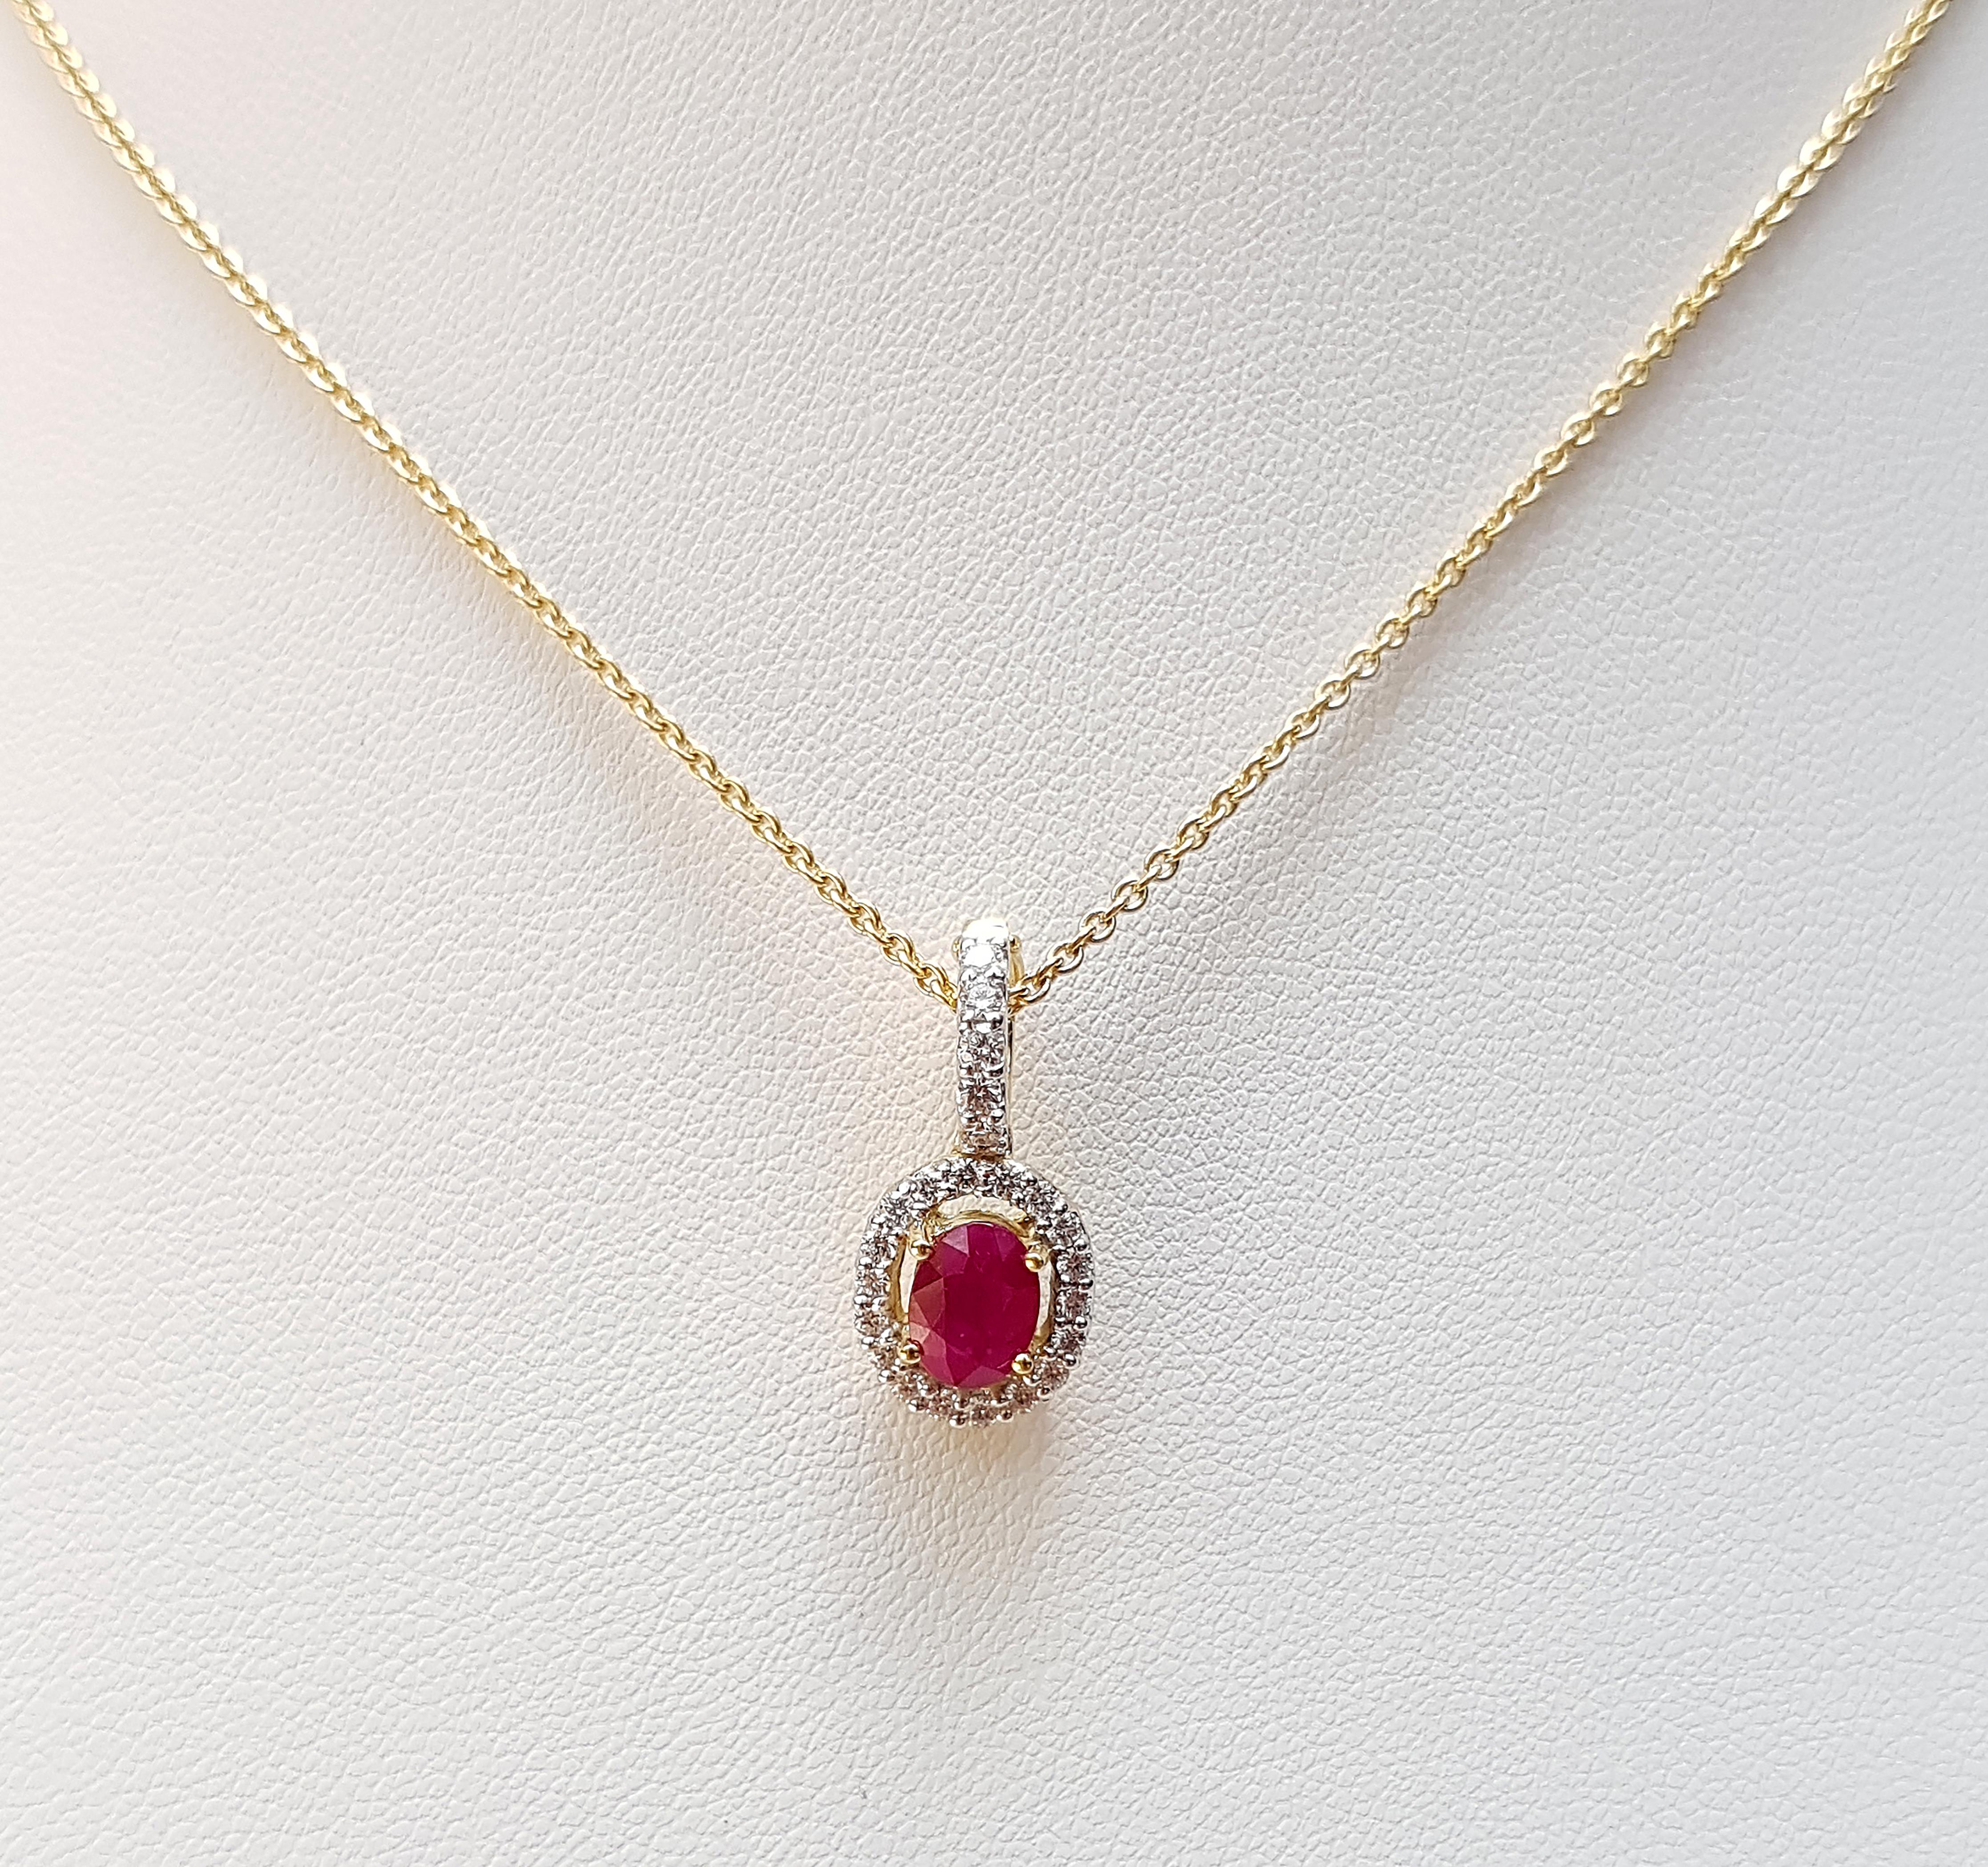 Ruby 1.07 carats with Diamond 0.30 carat Pendant set in 18 Karat Gold Settings
(chain not included)

Width:  1.0 cm 
Length: 2.0 cm
Total Weight 2.84 grams

